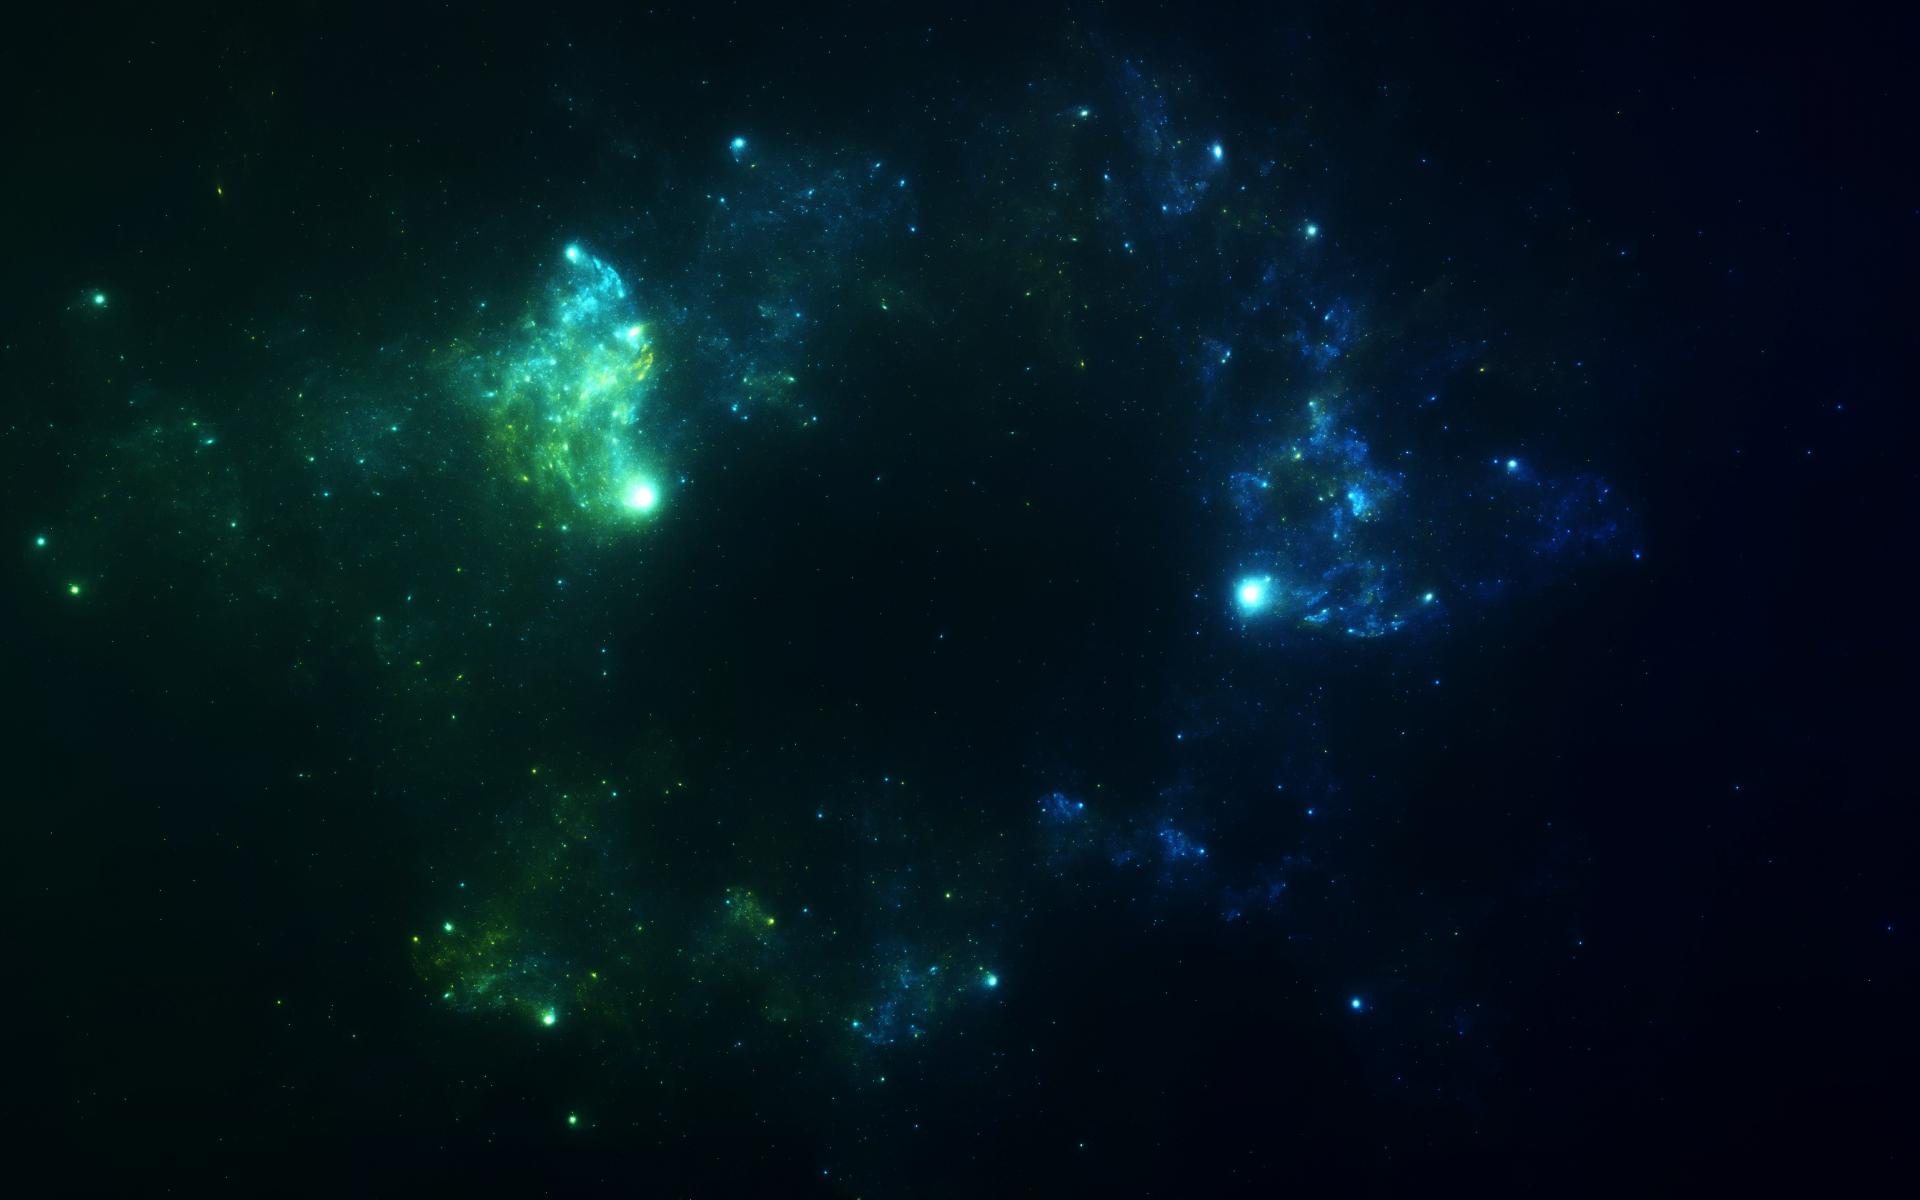 Download wallpaper 2560x1440 planet green space stars universe  widescreen 169 hd background